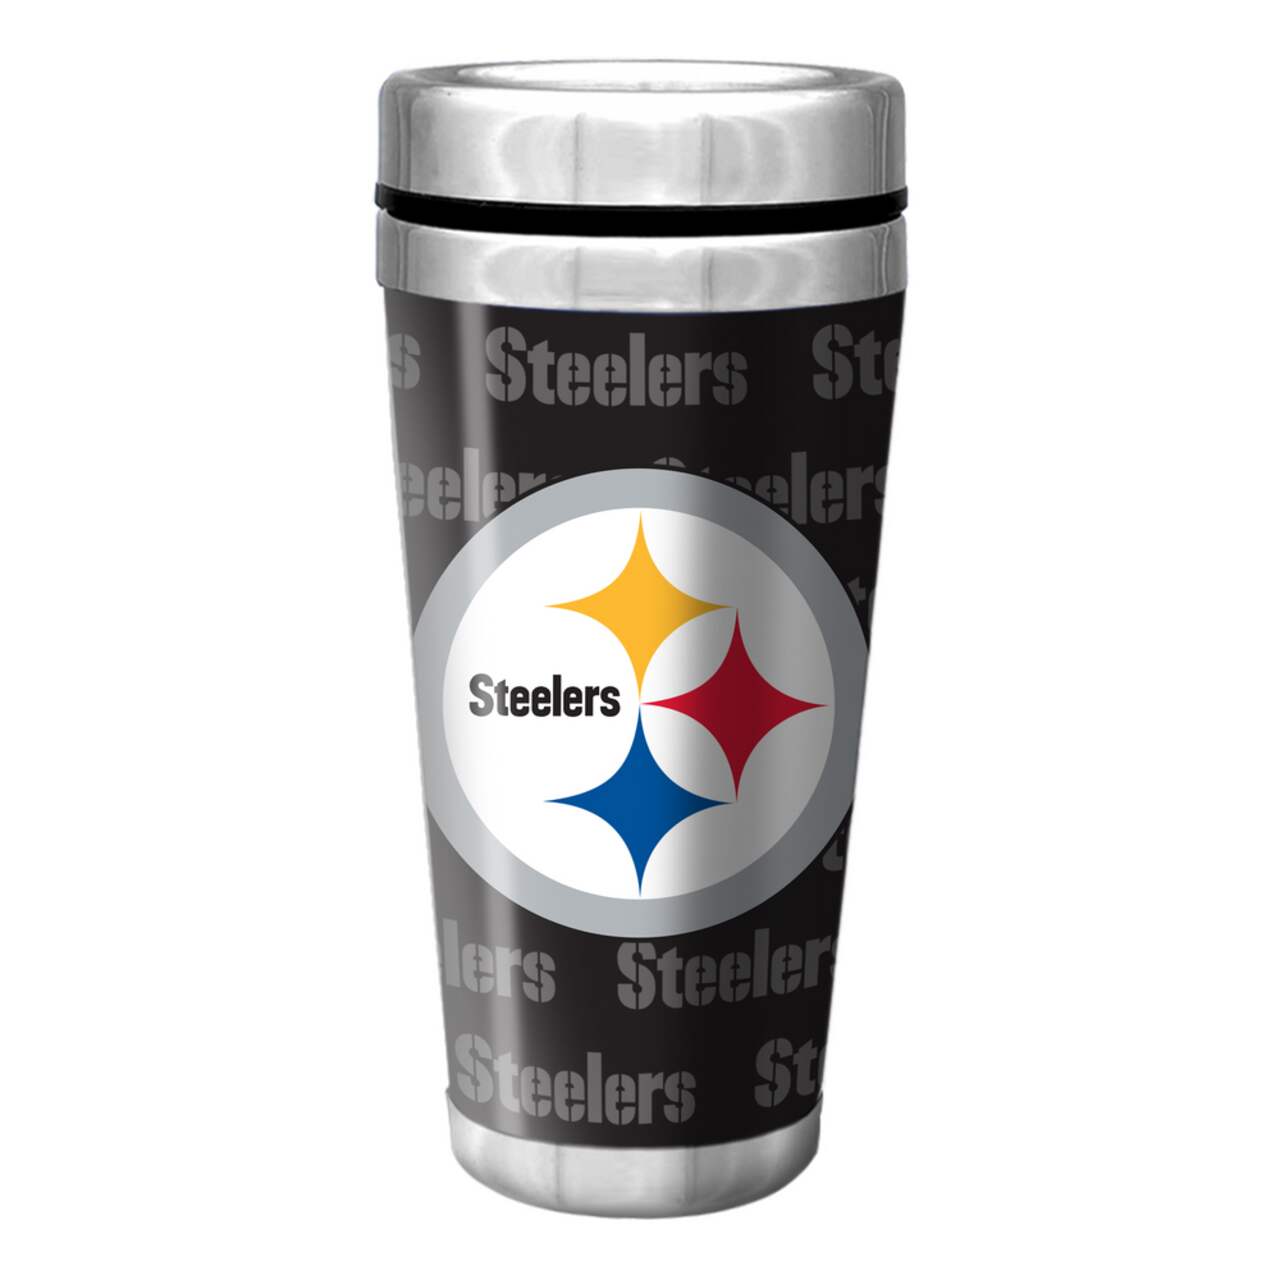 https://media-www.canadiantire.ca/product/playing/team-sports-and-golf/sports-equipment-accessories/0845208/pittsburgh-steelers-full-wrap-travel-mug-16oz-82325887-418a-45c0-ab88-dedc15c78cf5.png?imdensity=1&imwidth=640&impolicy=mZoom